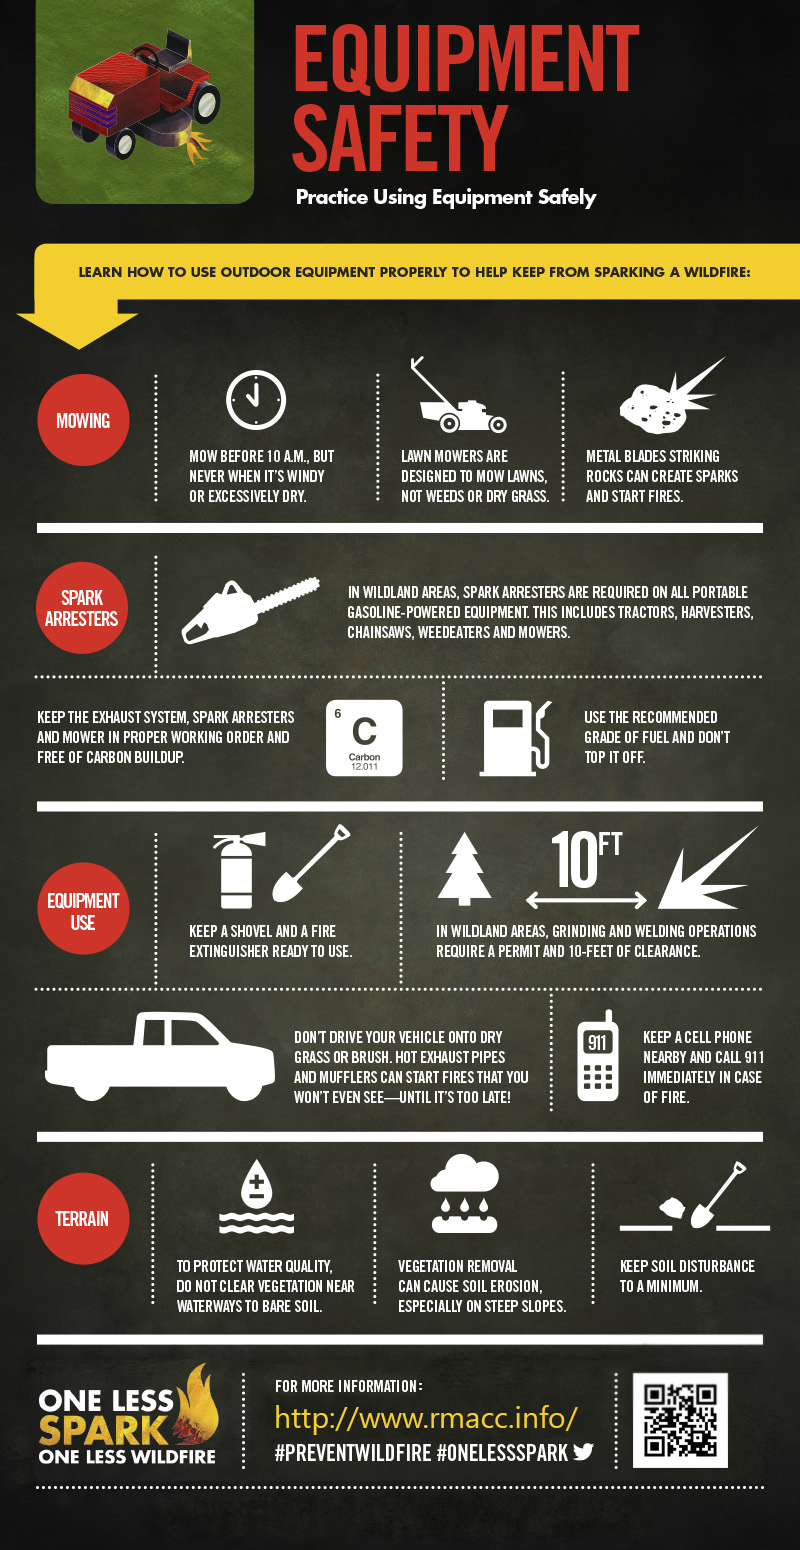 Equipment safety infographic